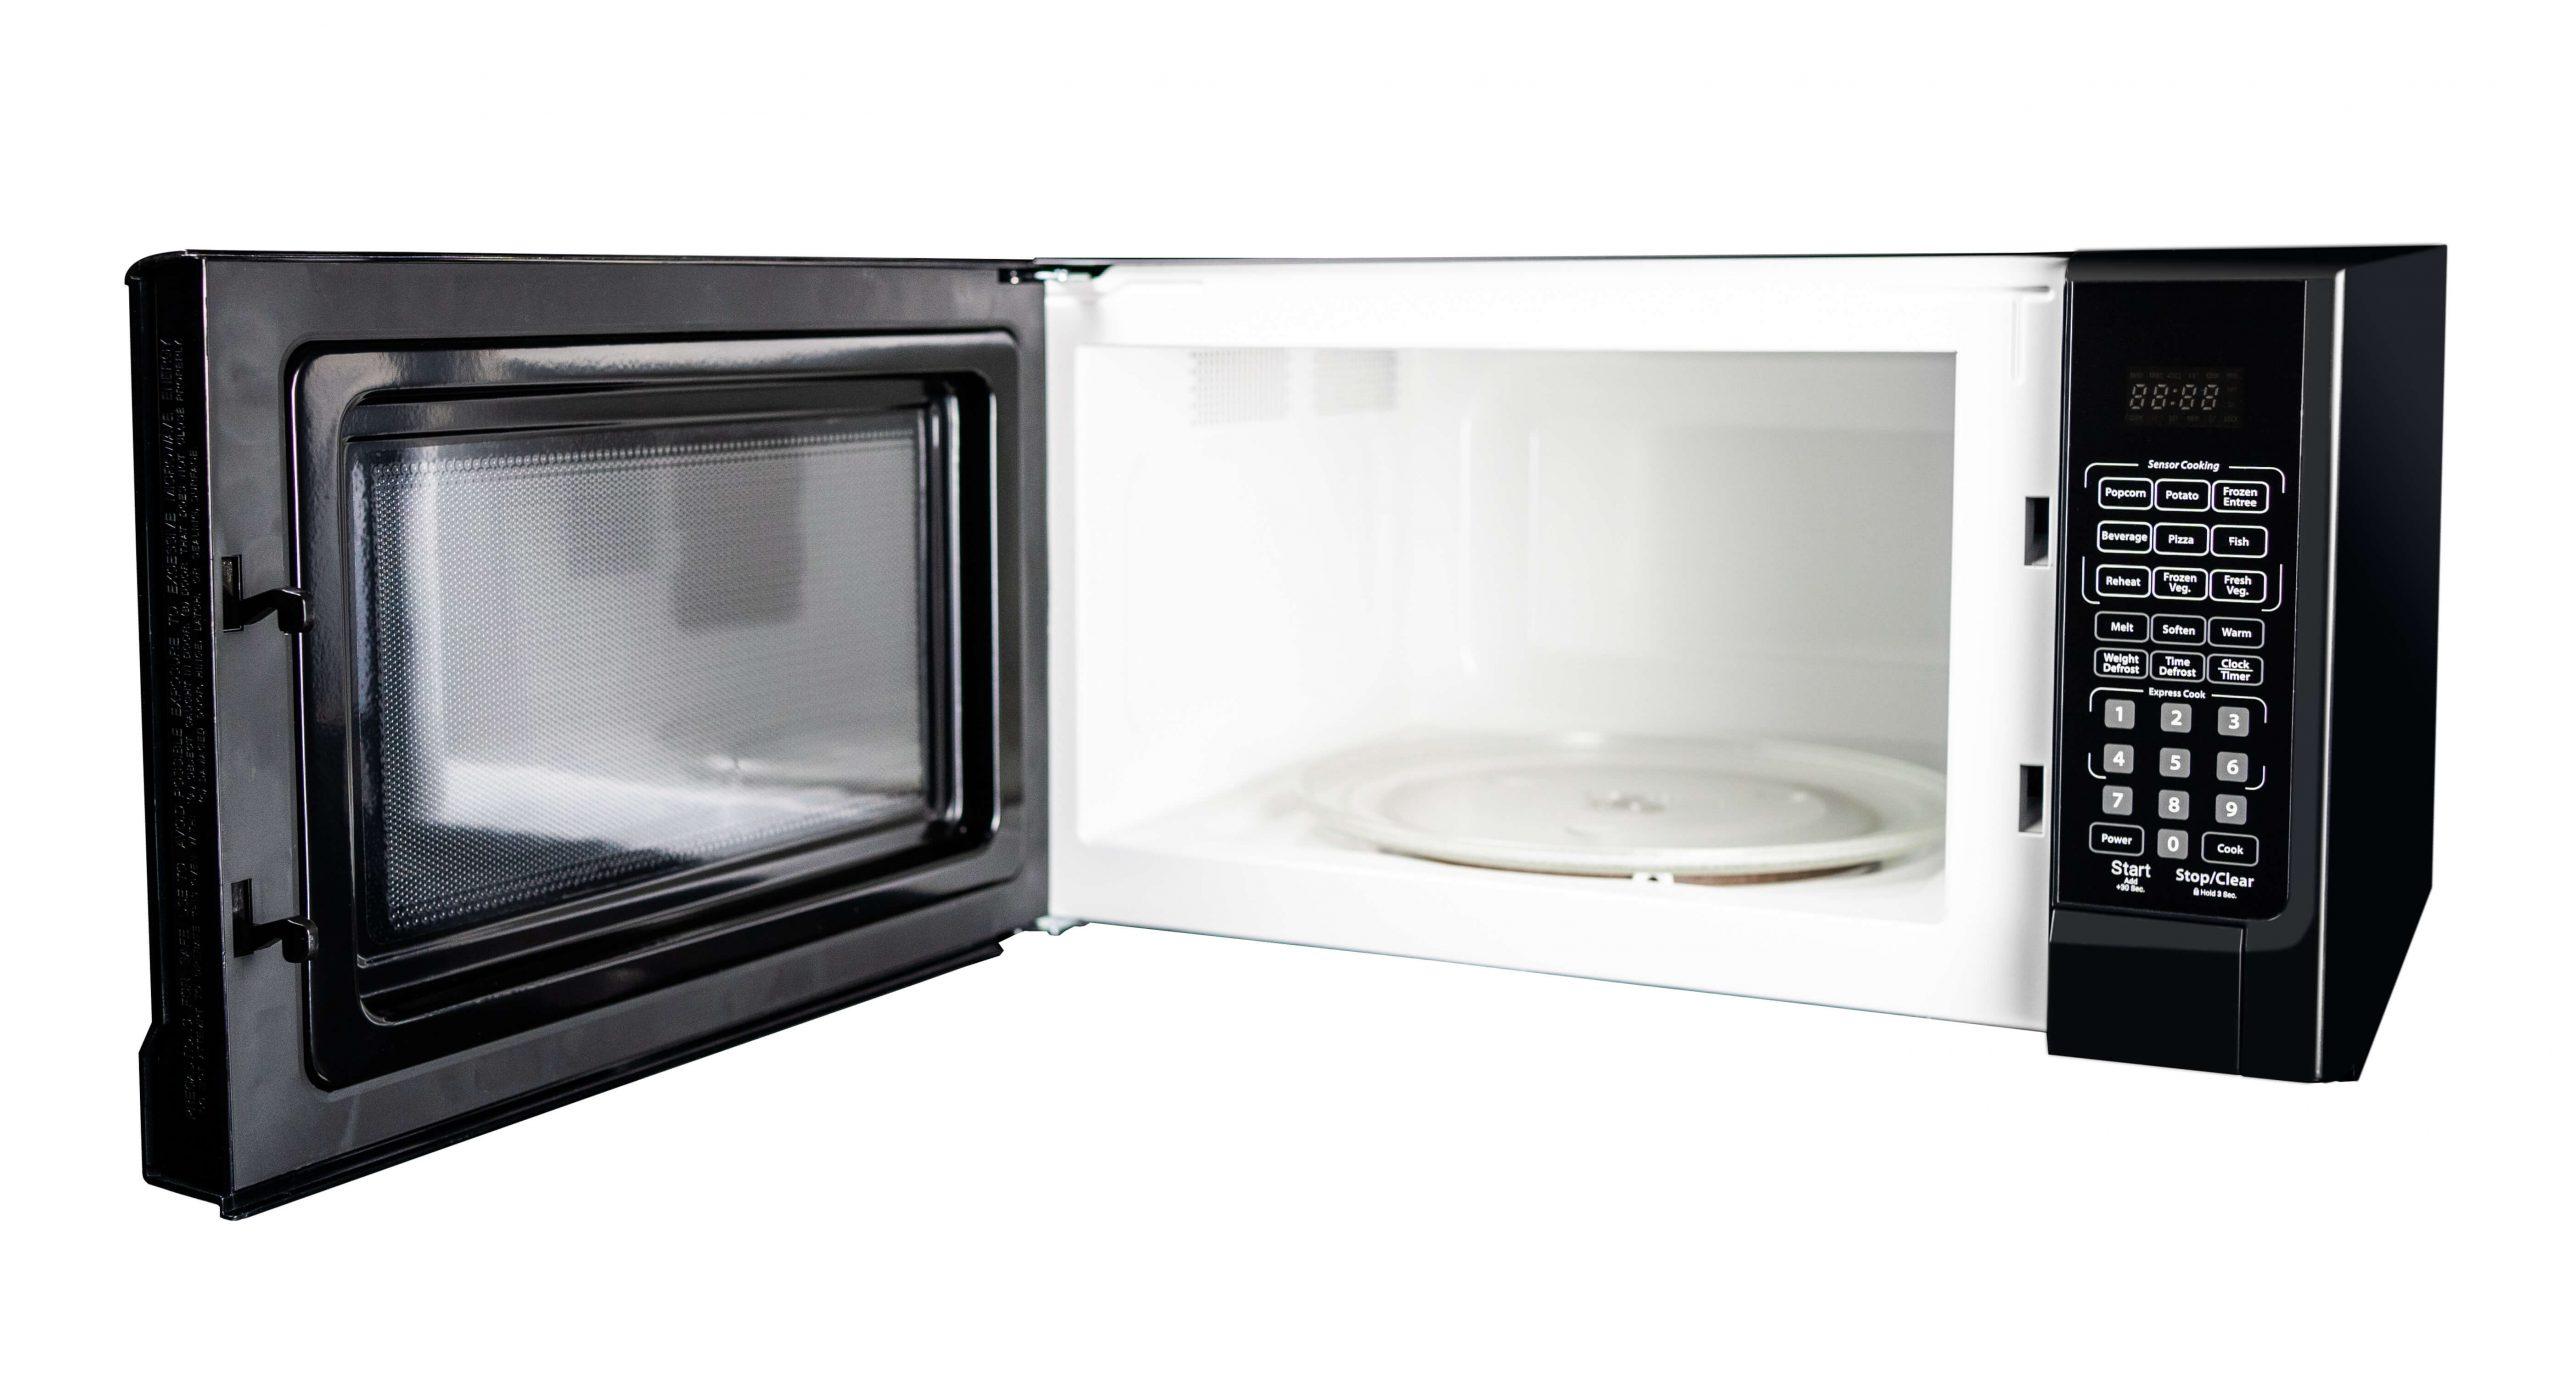 Danby 1.4 cu. ft. Over The Range Microwave Oven in Stainless Steel